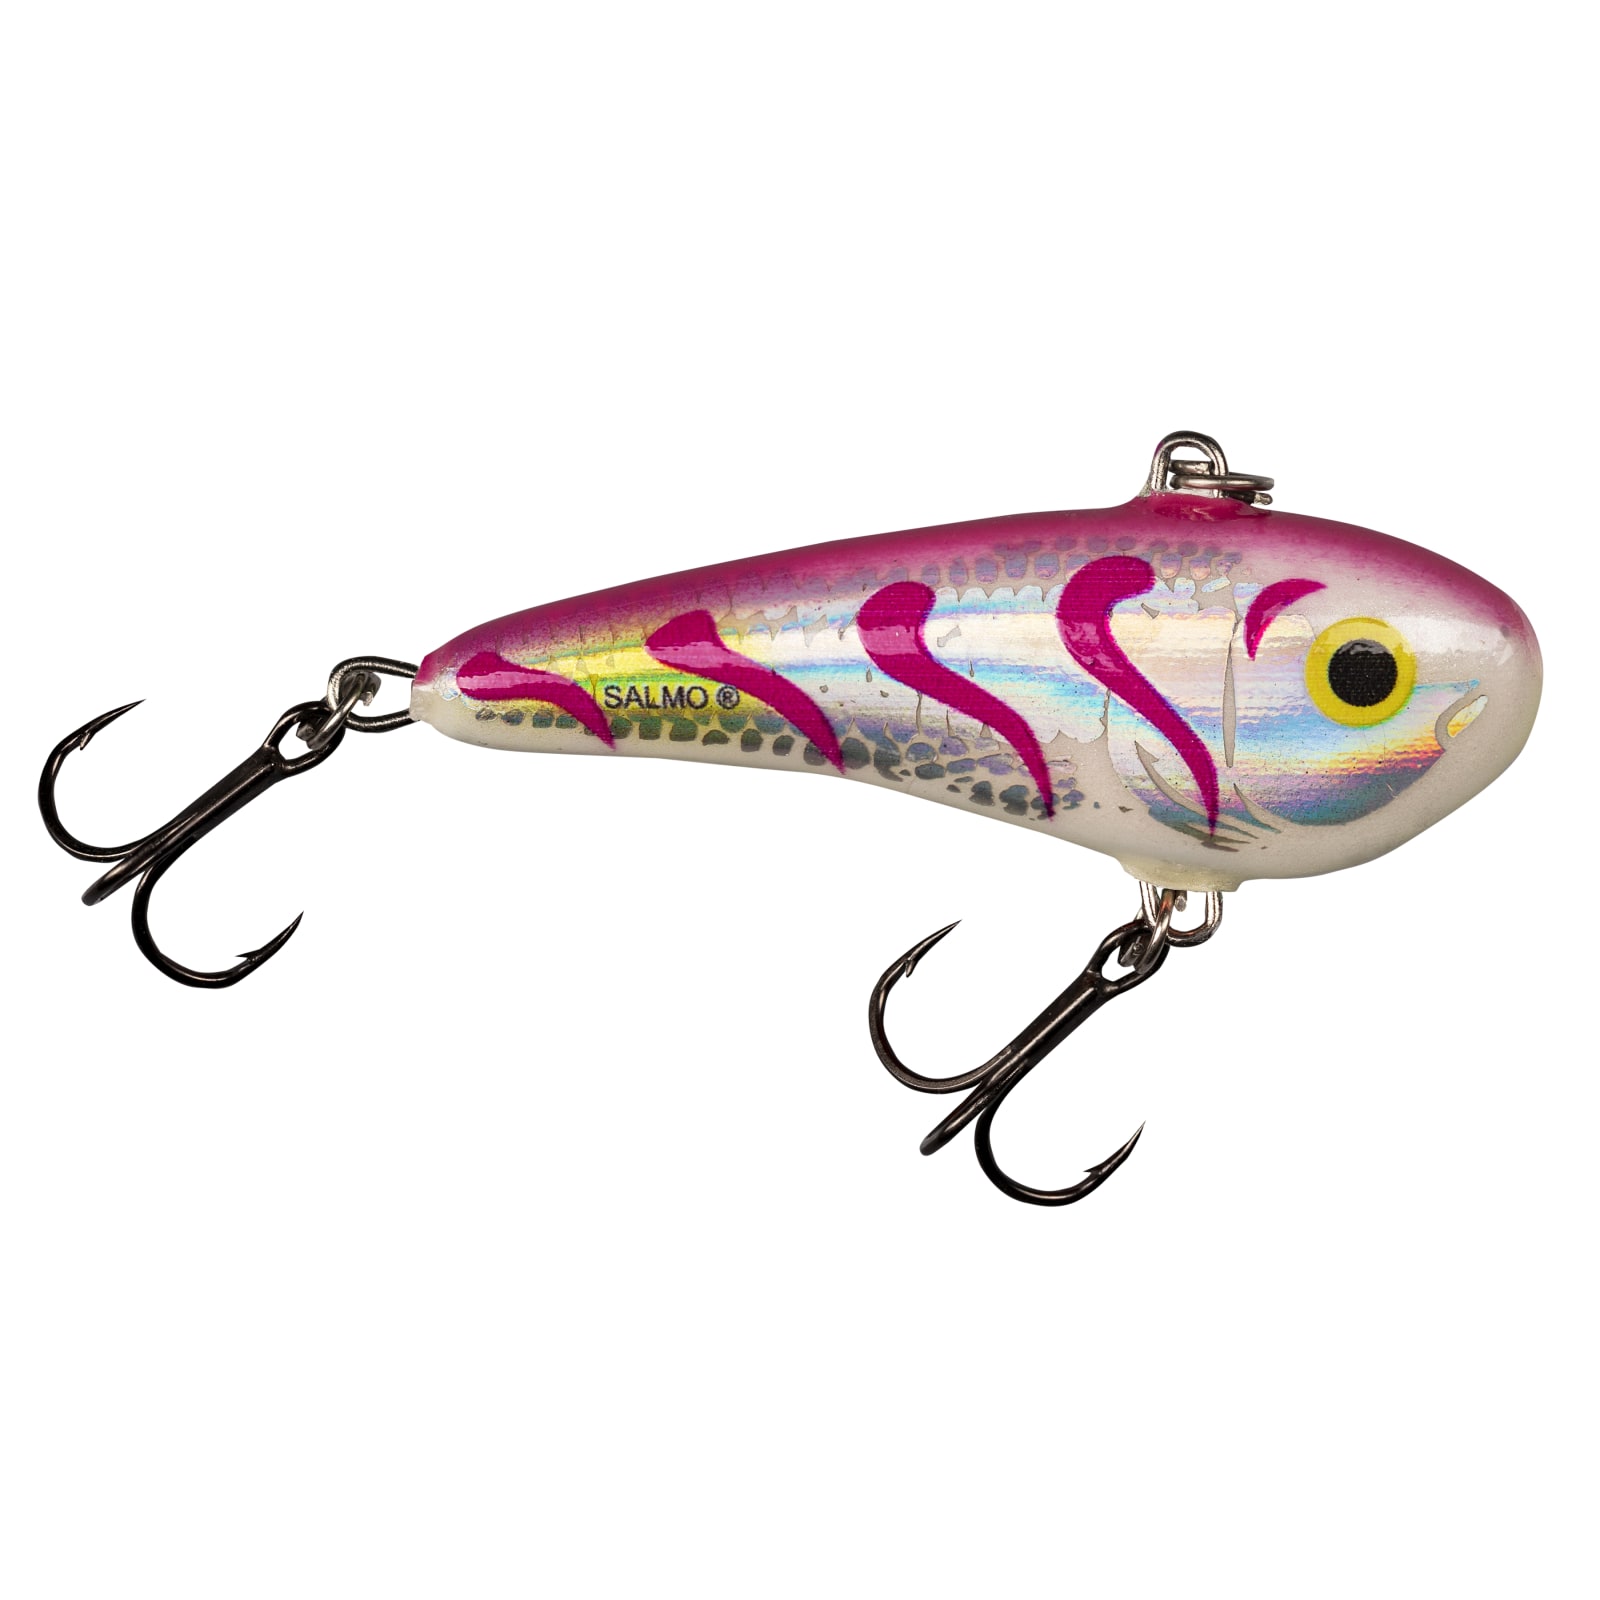 Holographic Pink Tiger Chubby Darter Sinking Jig by Salmo at Fleet Farm